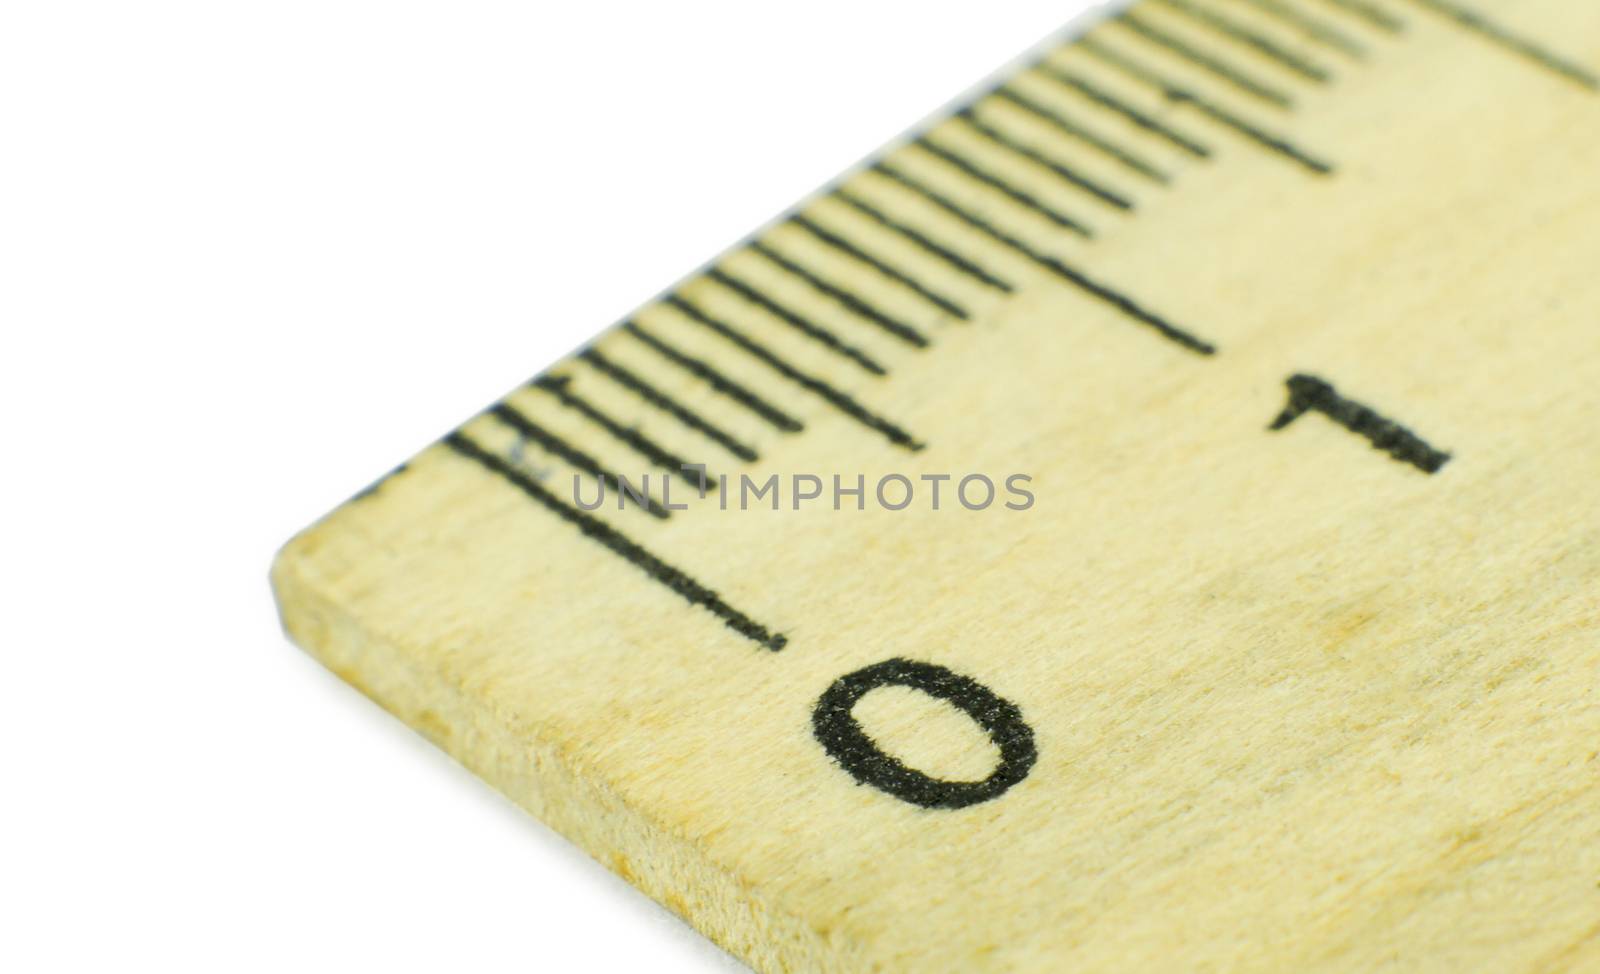 Ruler isolated on white. For your commercial and editorial use.